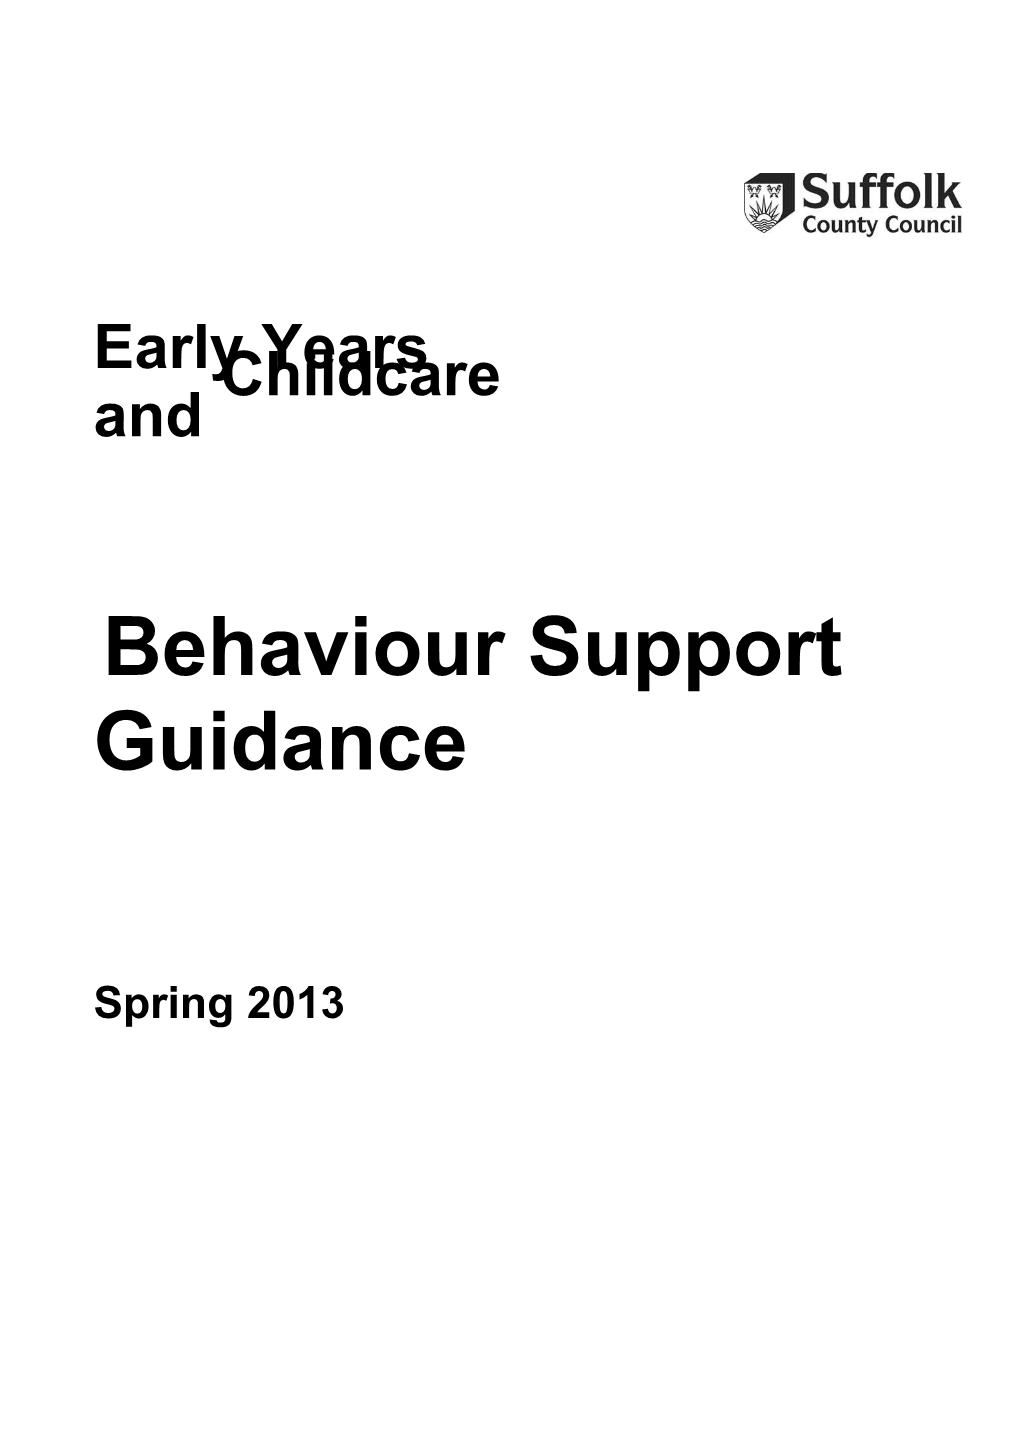 Rationale for Suffolk Earlyyears and Childcare Behaviour Guidance